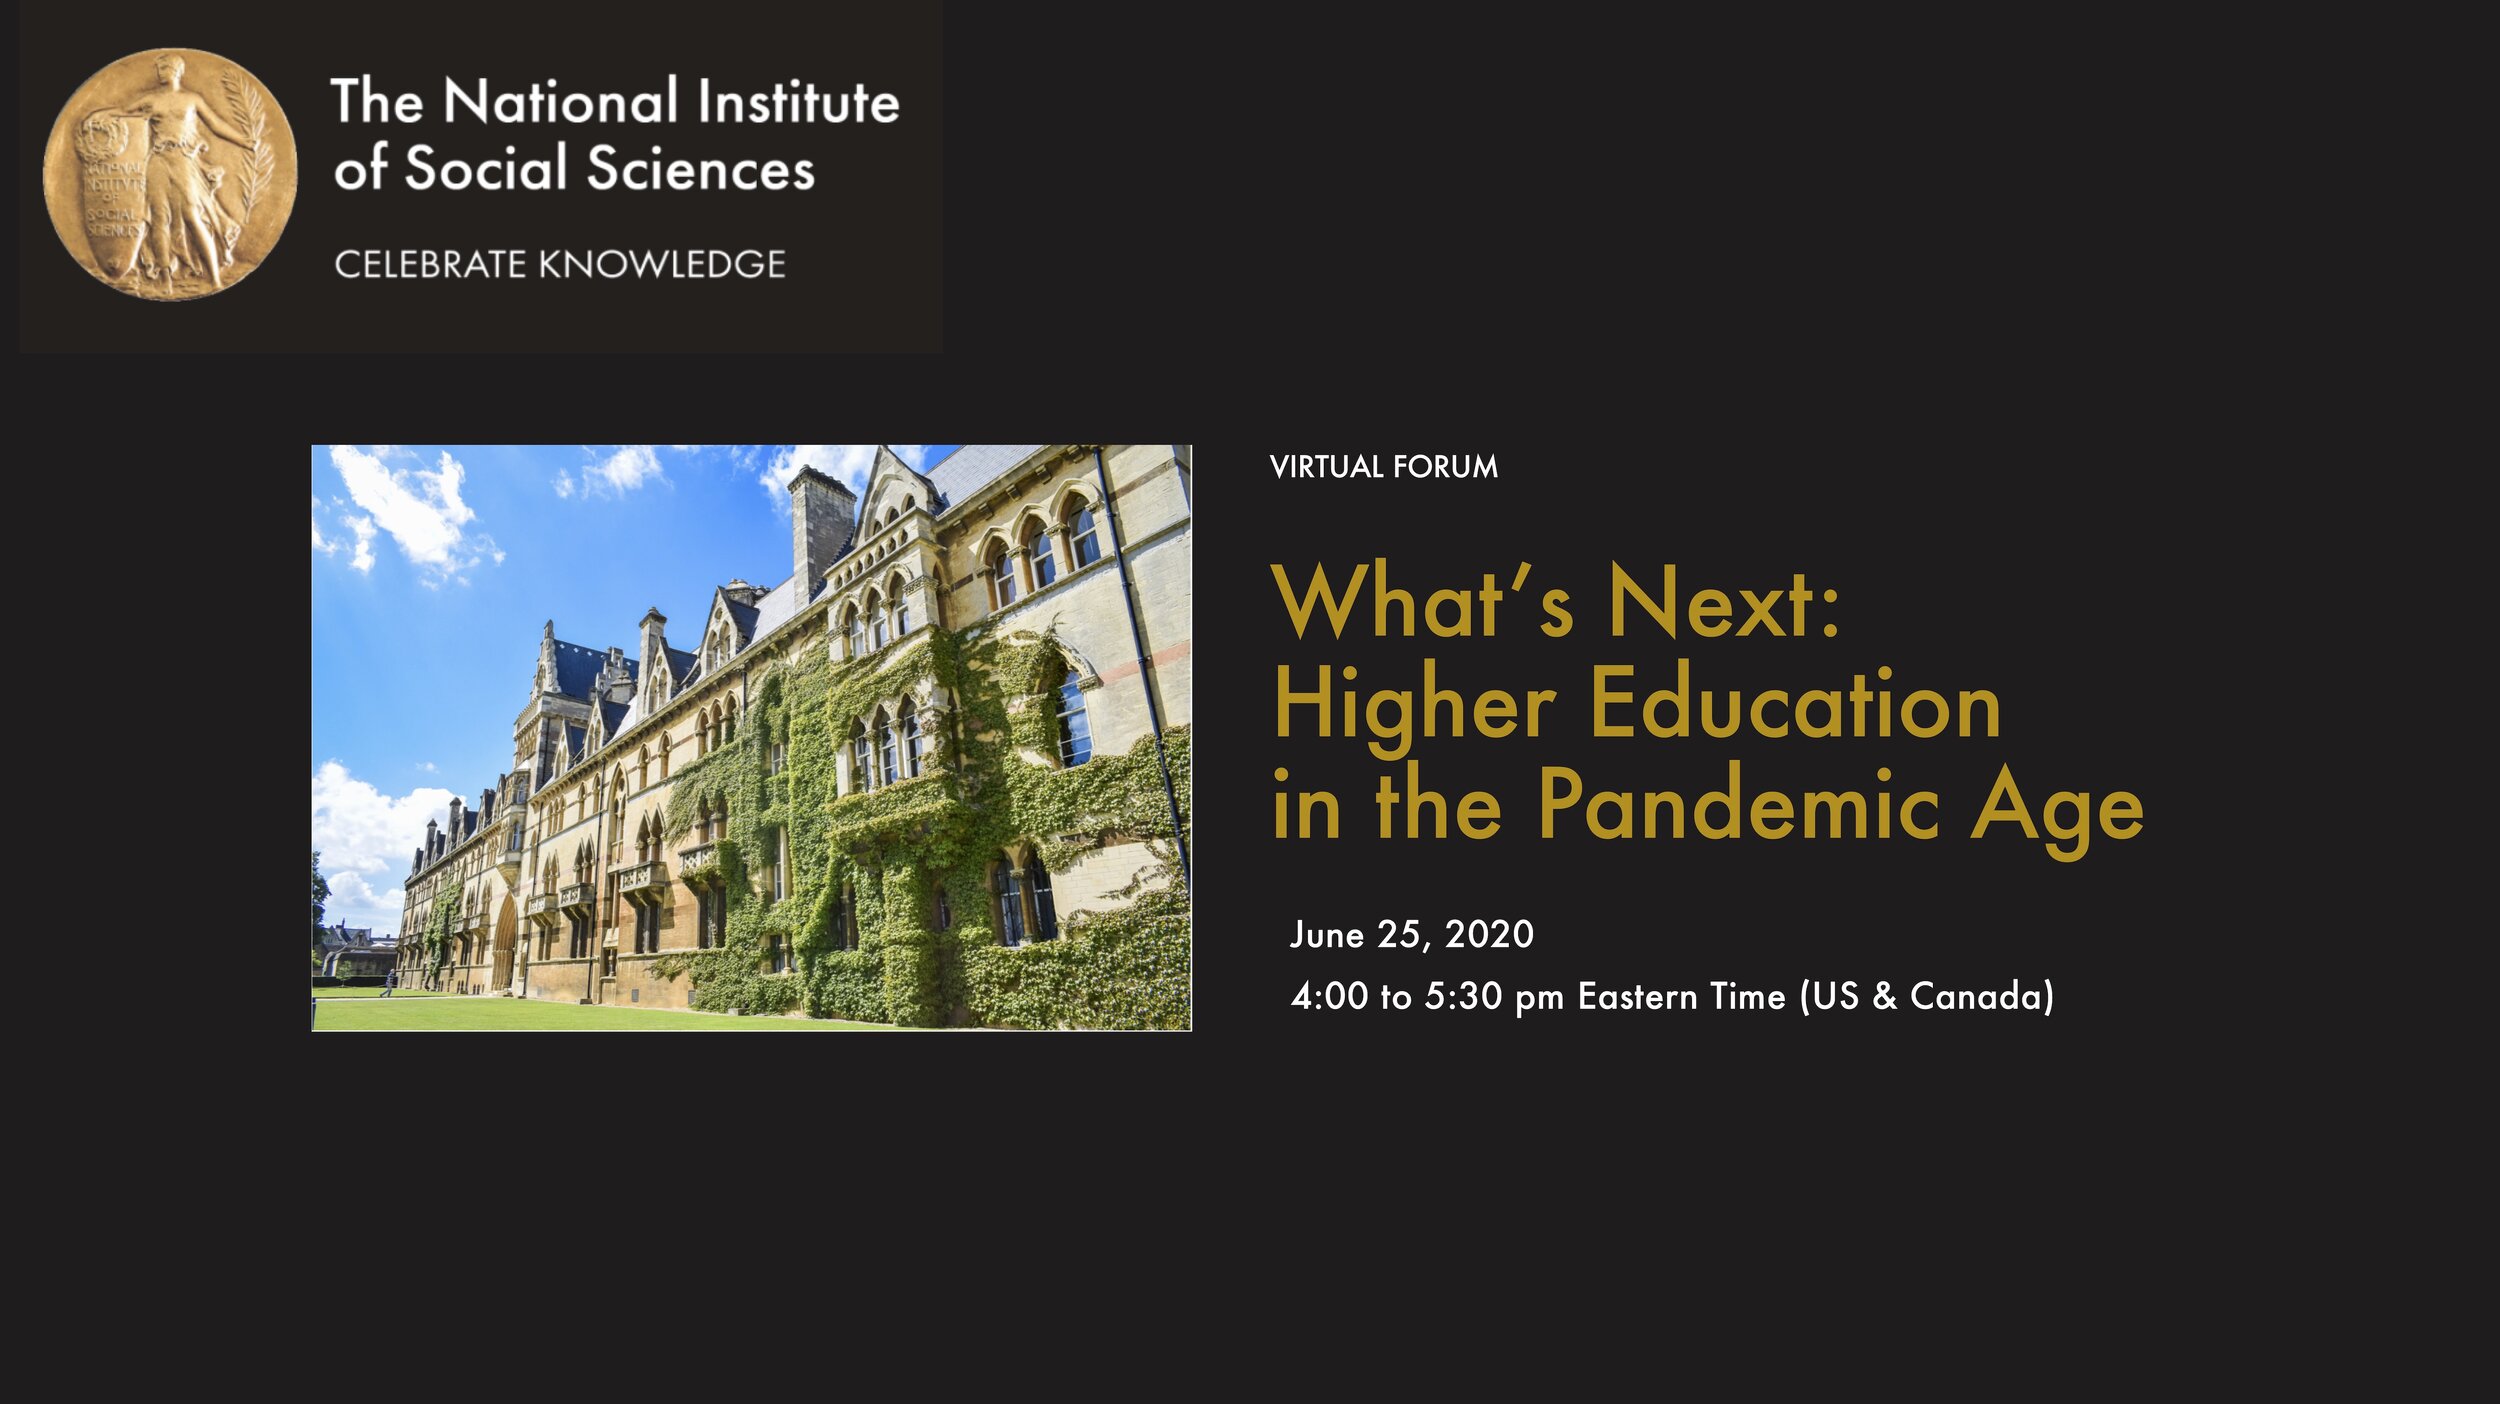 Higher Education in the Pandemic Age